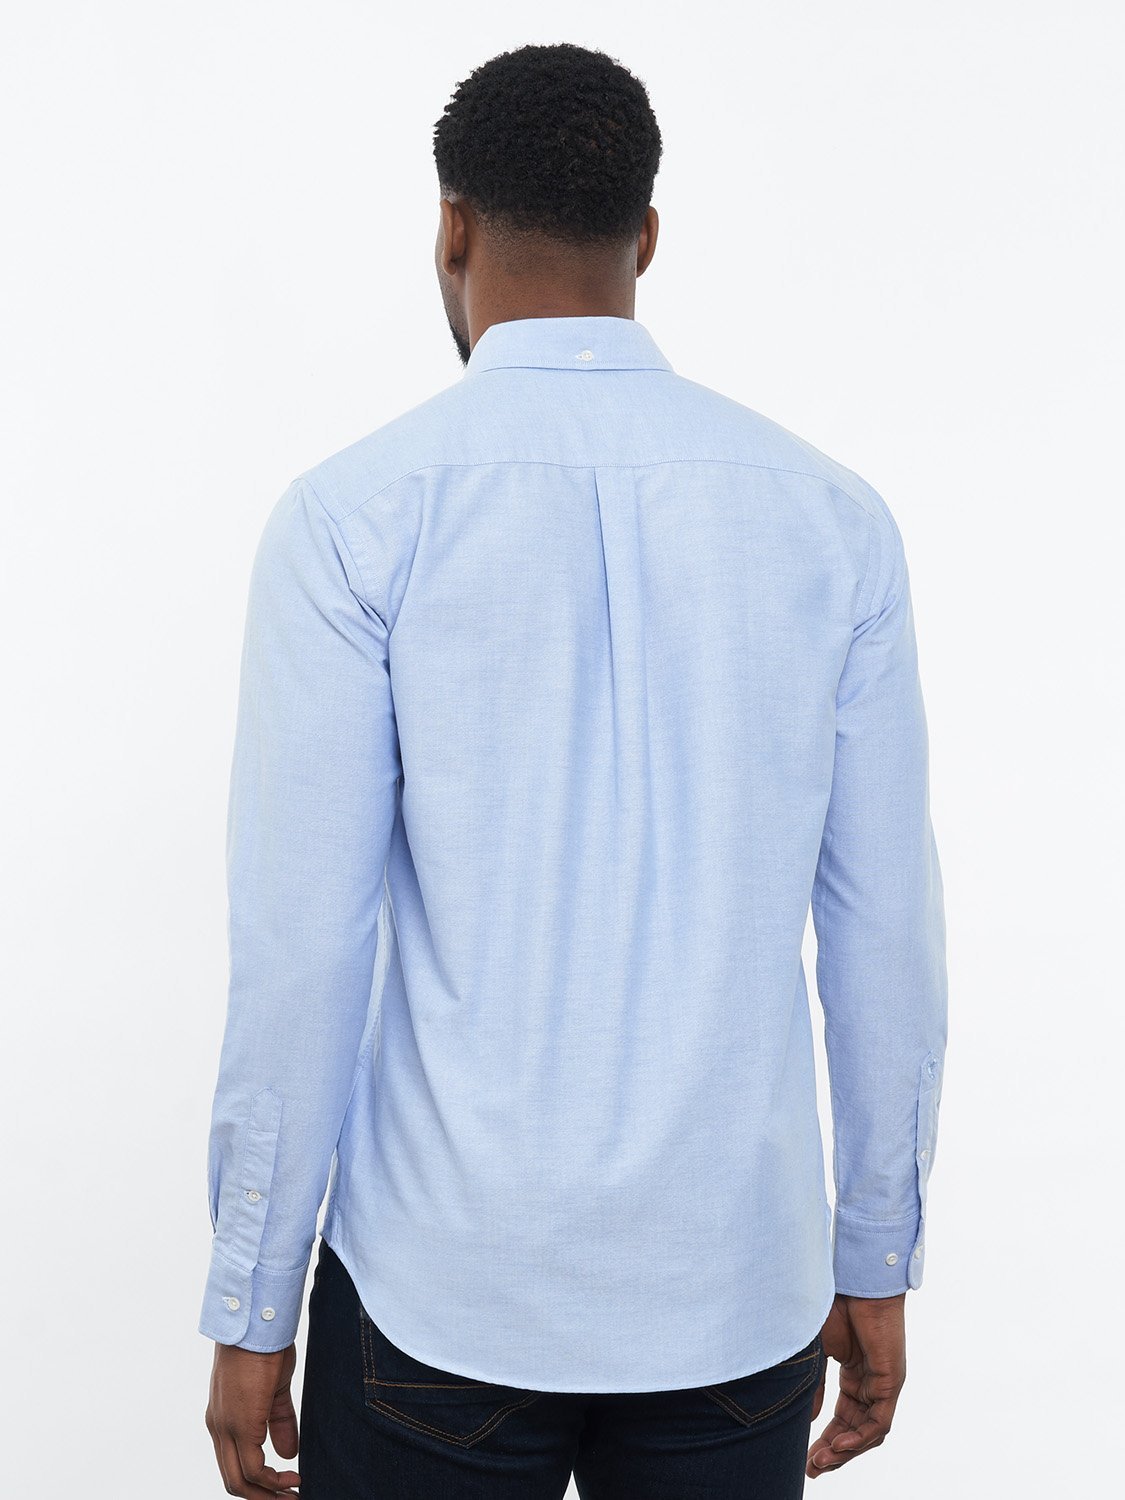 Sustainable Oxford Shirt from Organic Cotton Blue - CARPASUS Online Store